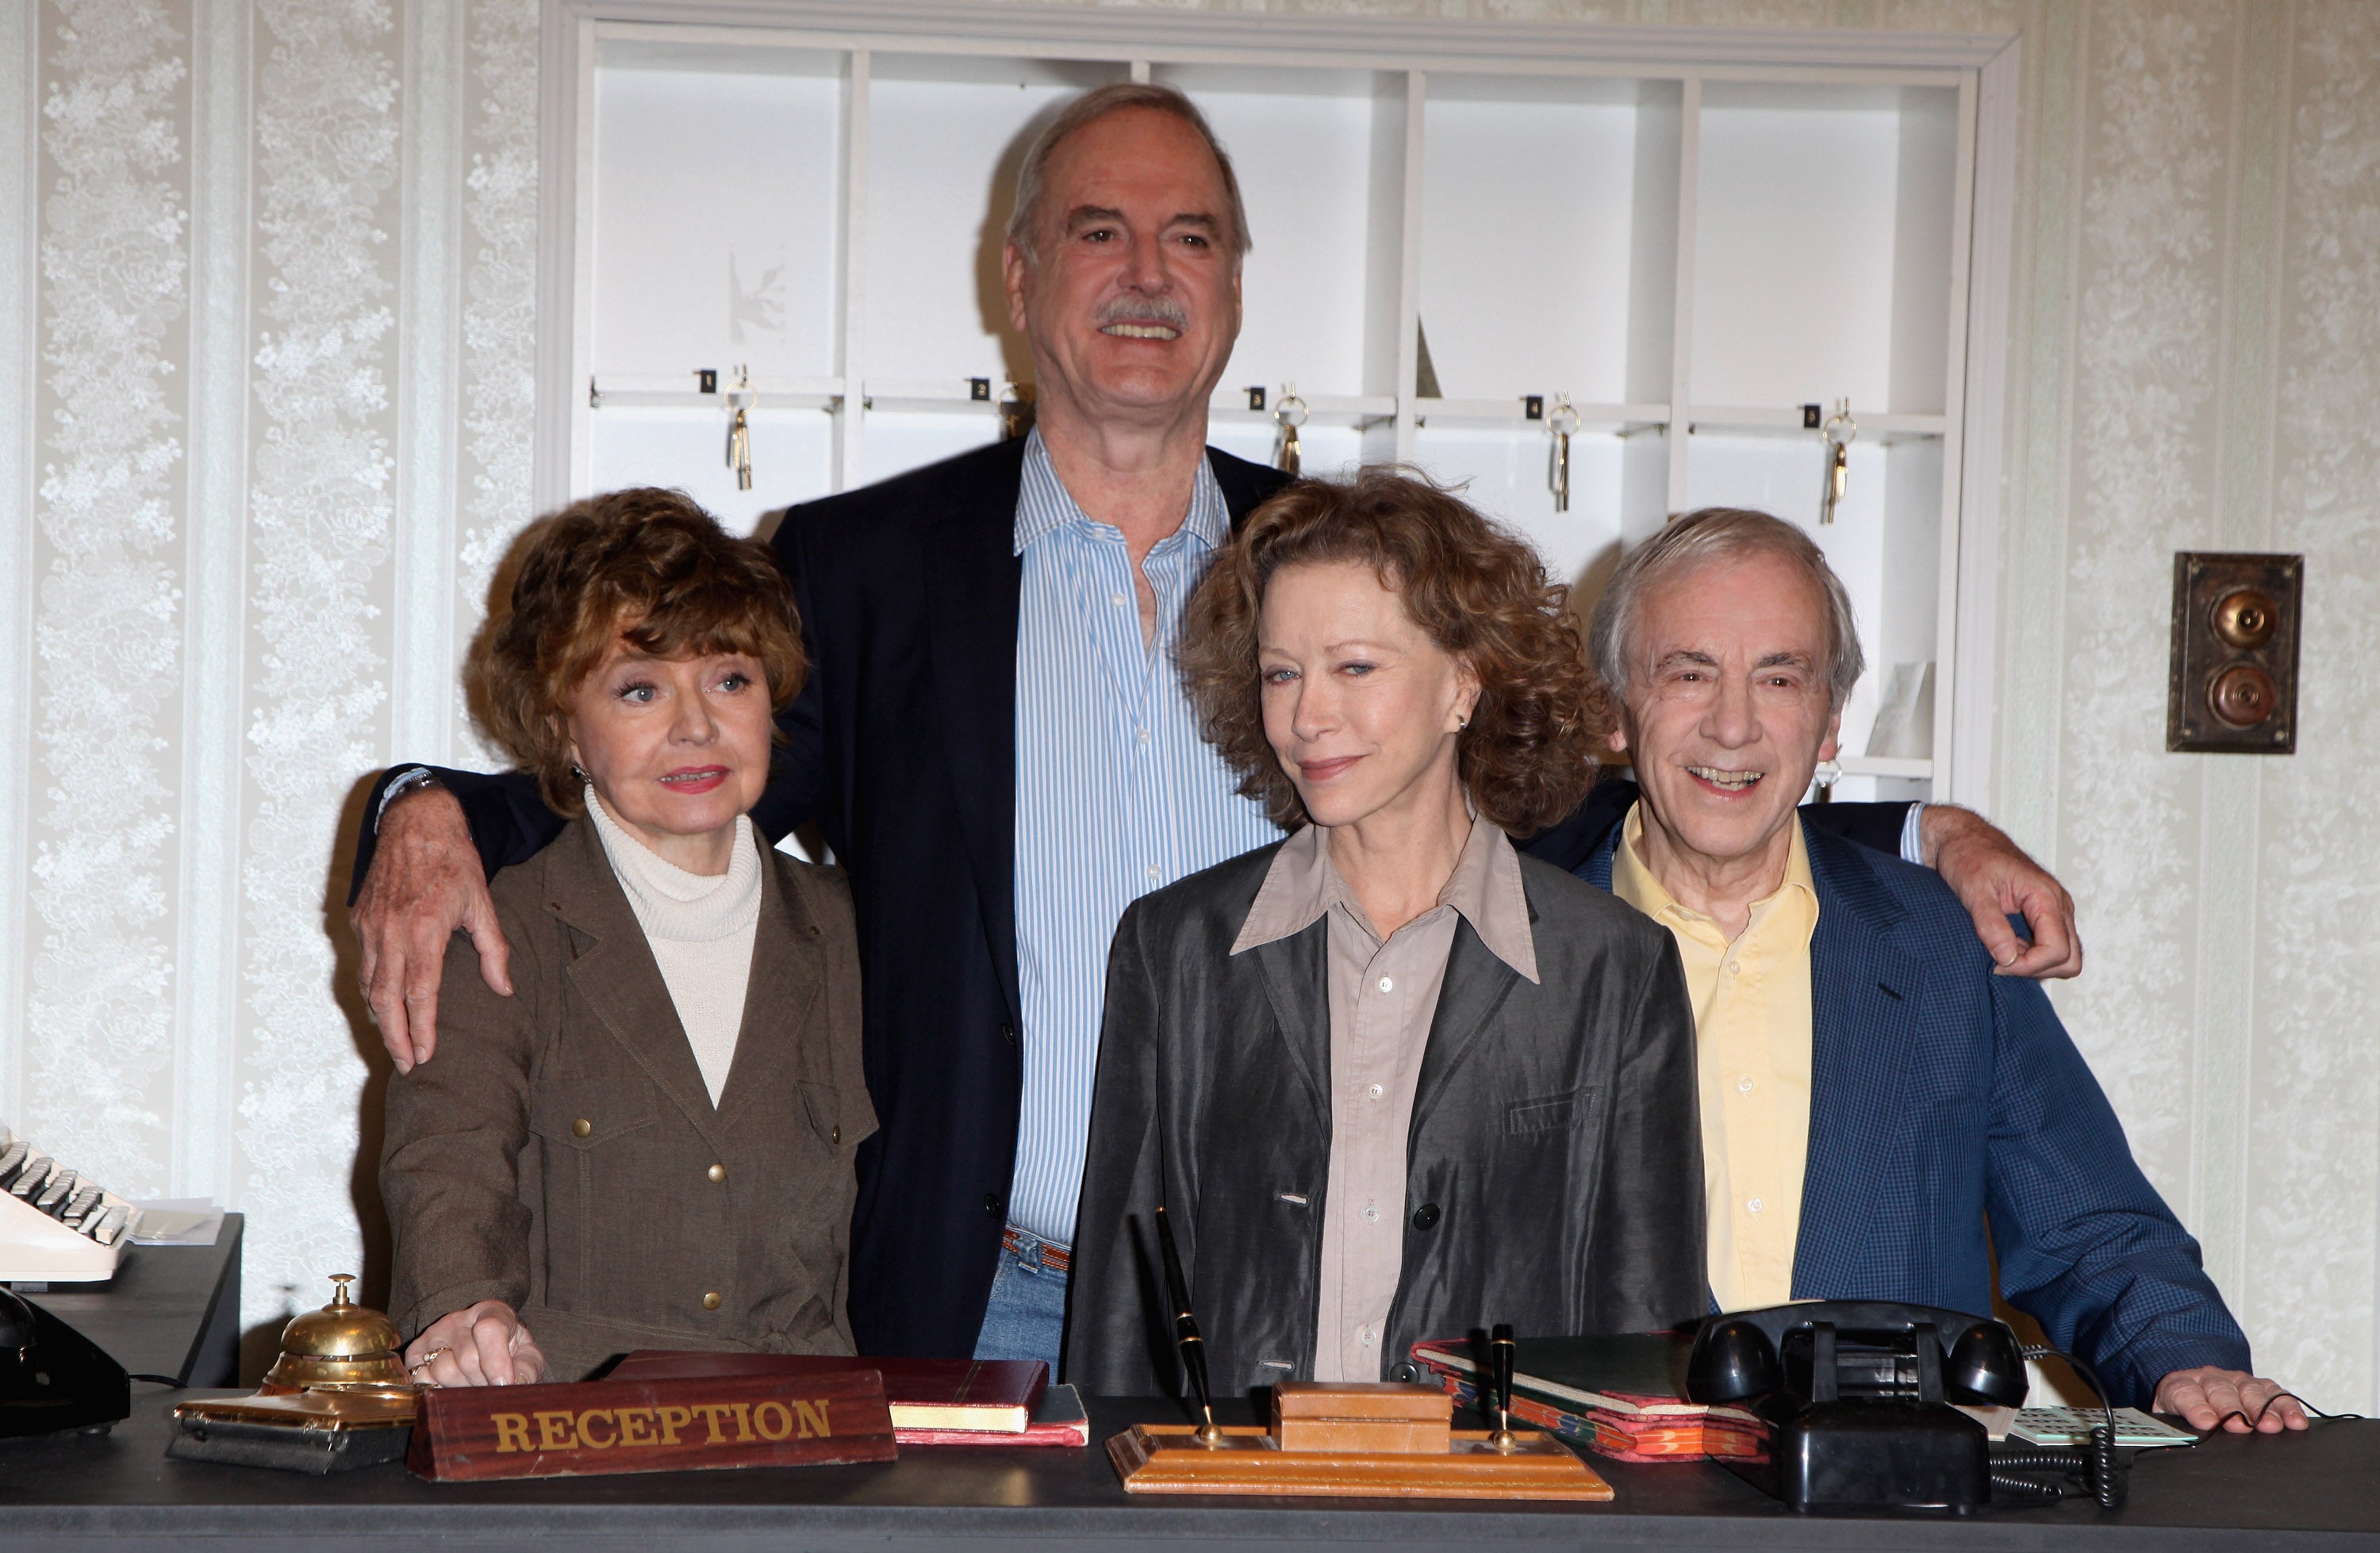 The original cast of Faulty Towers, Prunella Scales, John Cleese, Connie Booth and Andrew Sachs reuniting to celebrate the 30th anniversary in 2009